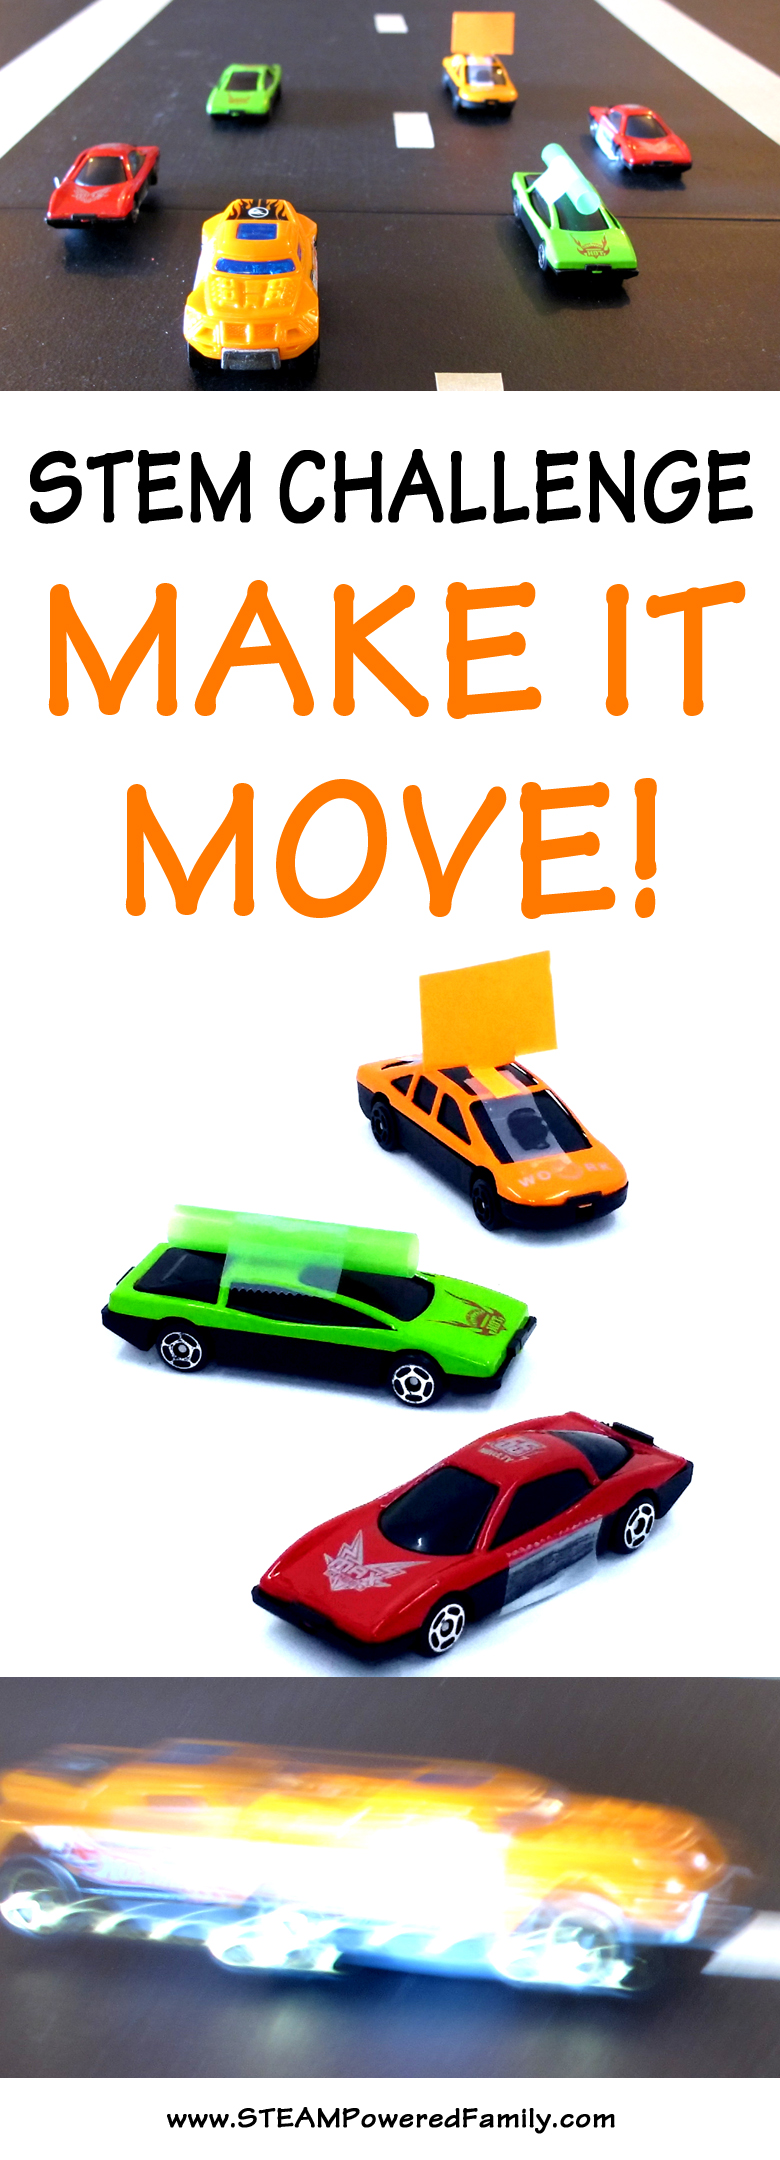 MAKE IT MOVE! - STEM Challenge that kids of all ages will love as they race to the finish!